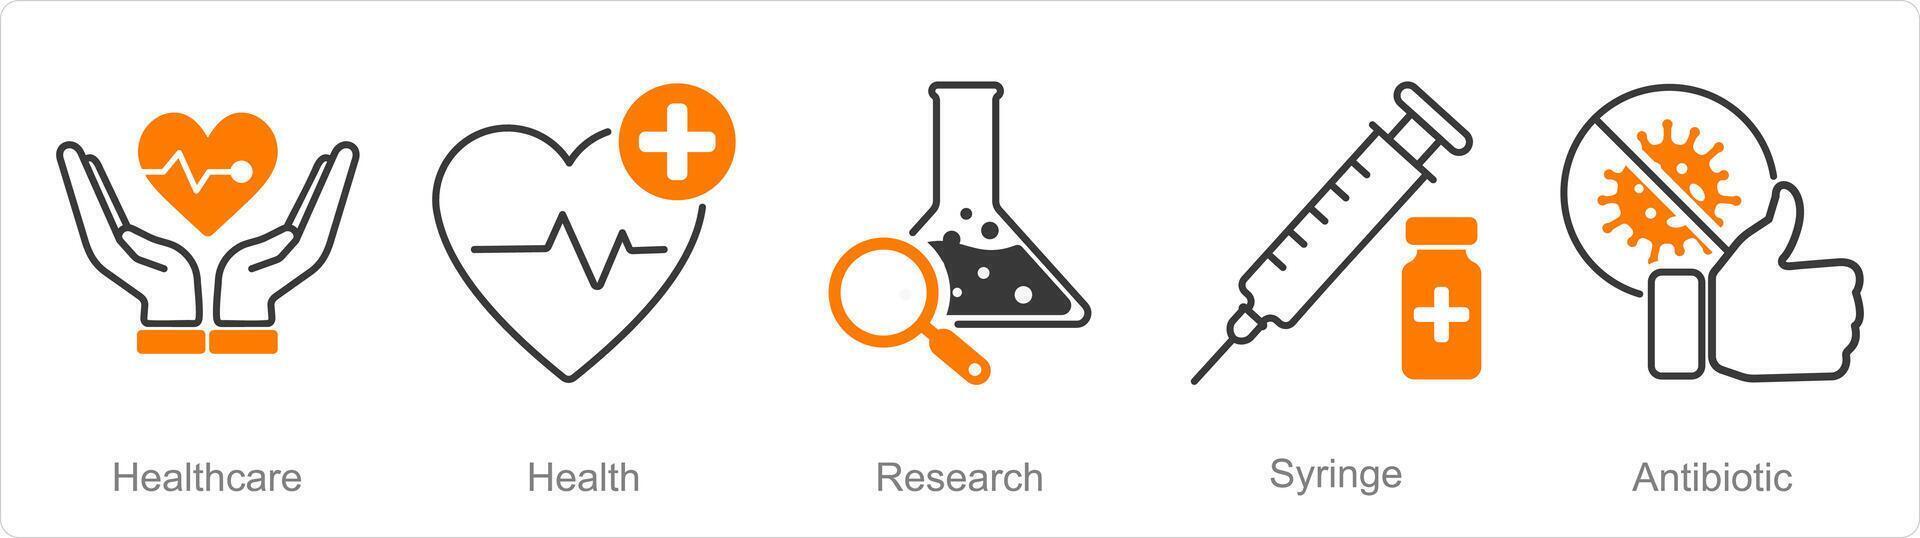 A set of 5 Pharmacy icons as health care, health, research vector